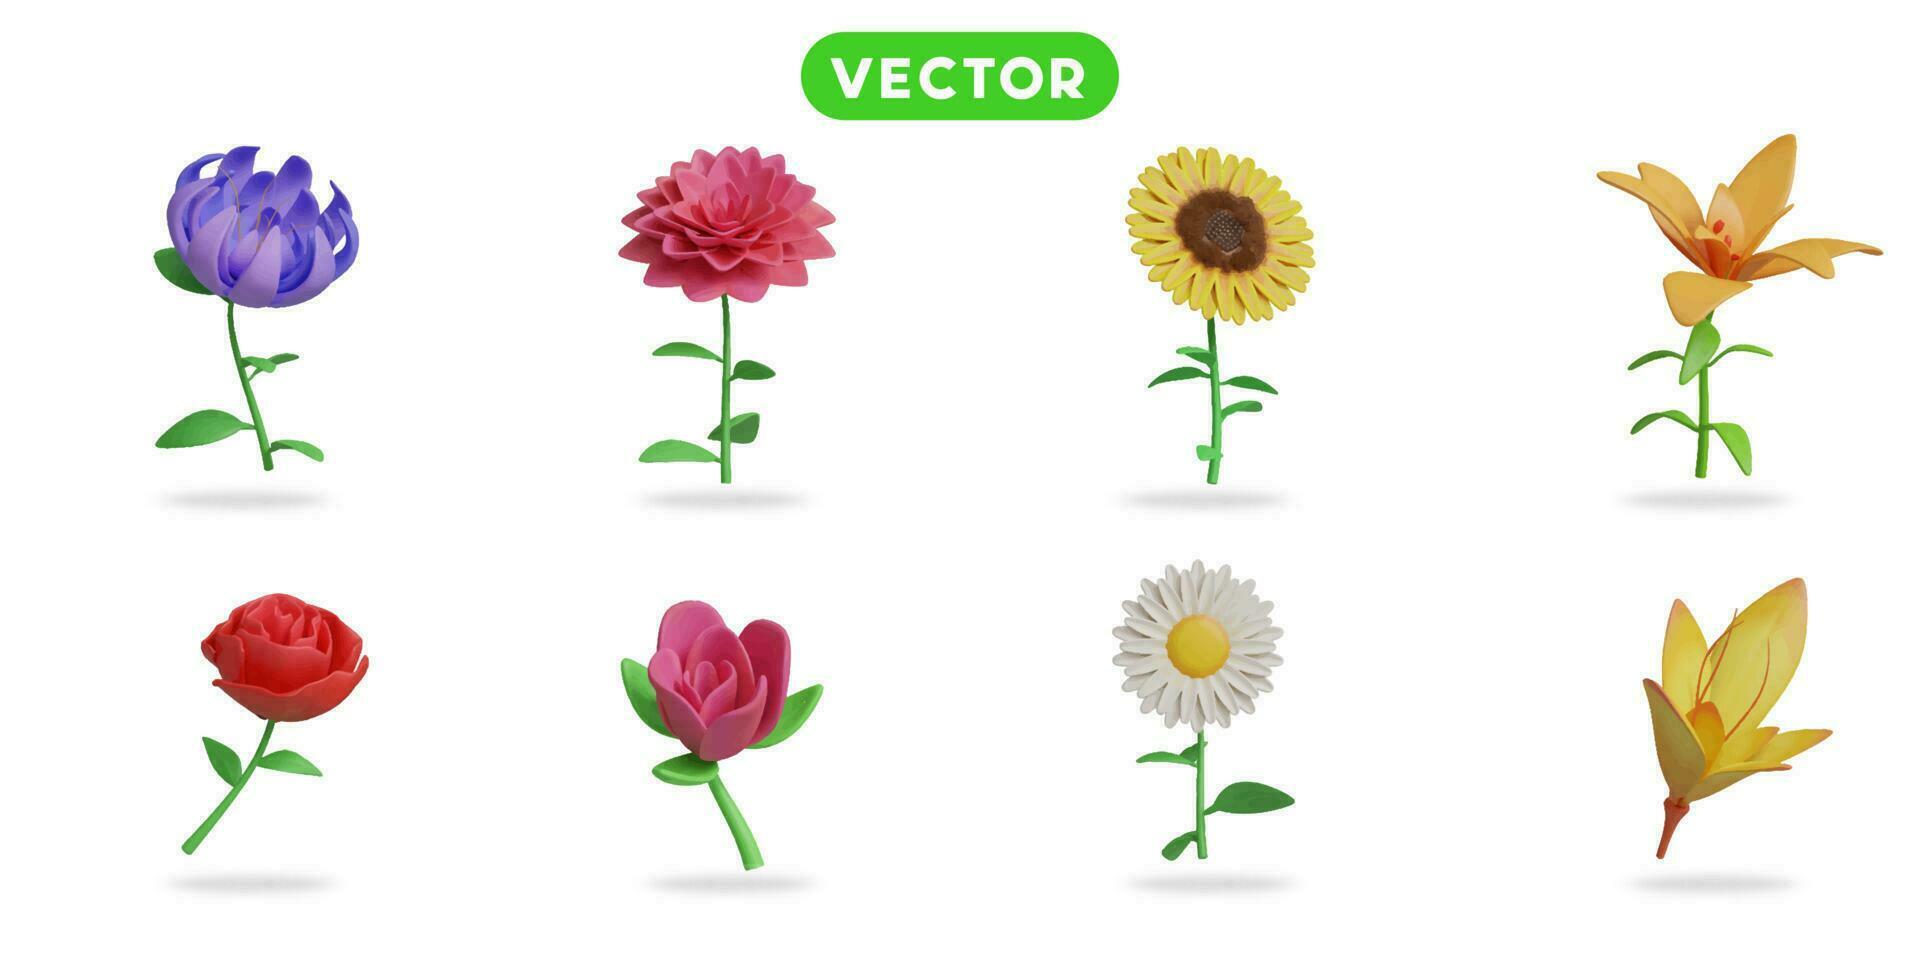 3d rendering. Flowers in spring and summer icons set on a white background Cremon flower, dahlia flower, sunflower, tiger lily, rose, tulip, daisy, lily vector